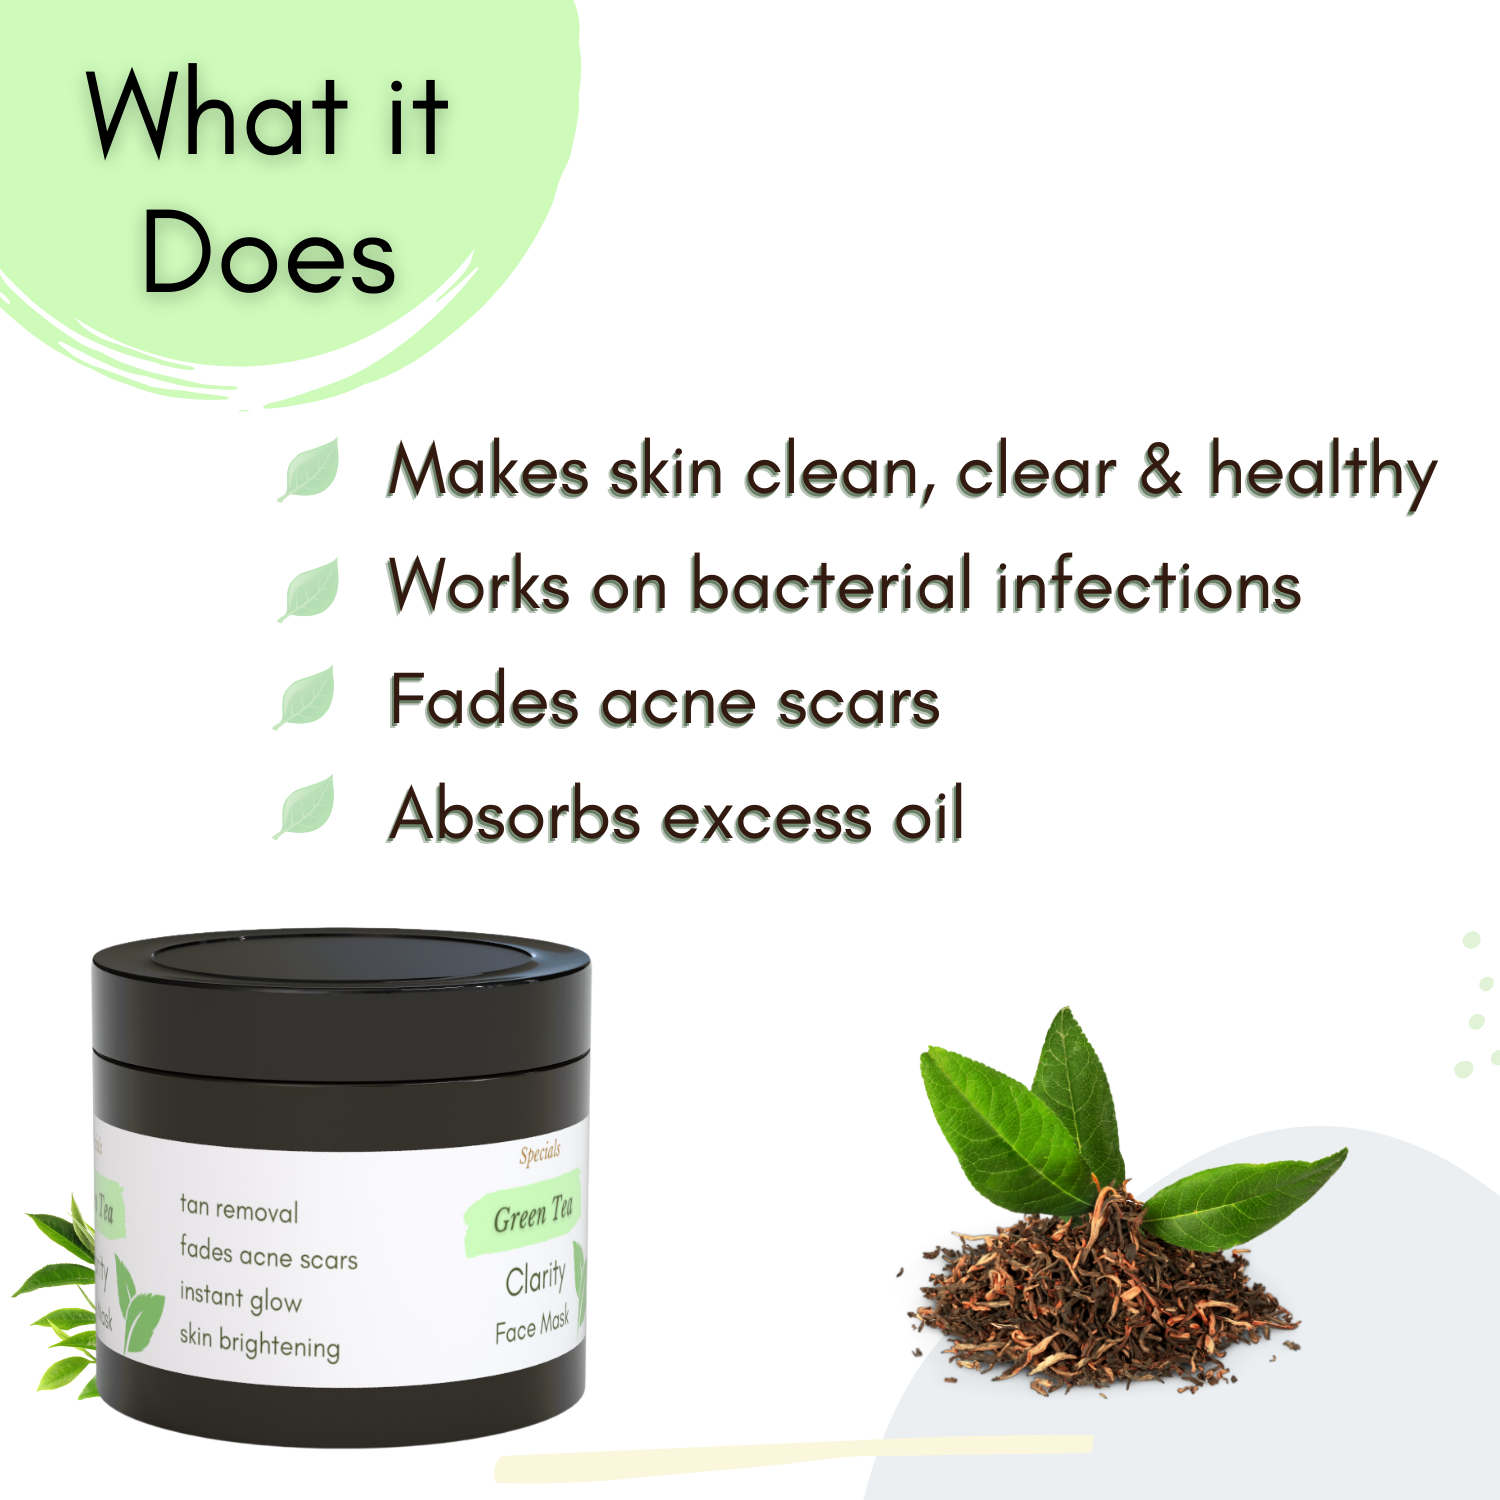 Green Tea Clarity Face Mask for Clarifying Oily and Acne Prone Skin